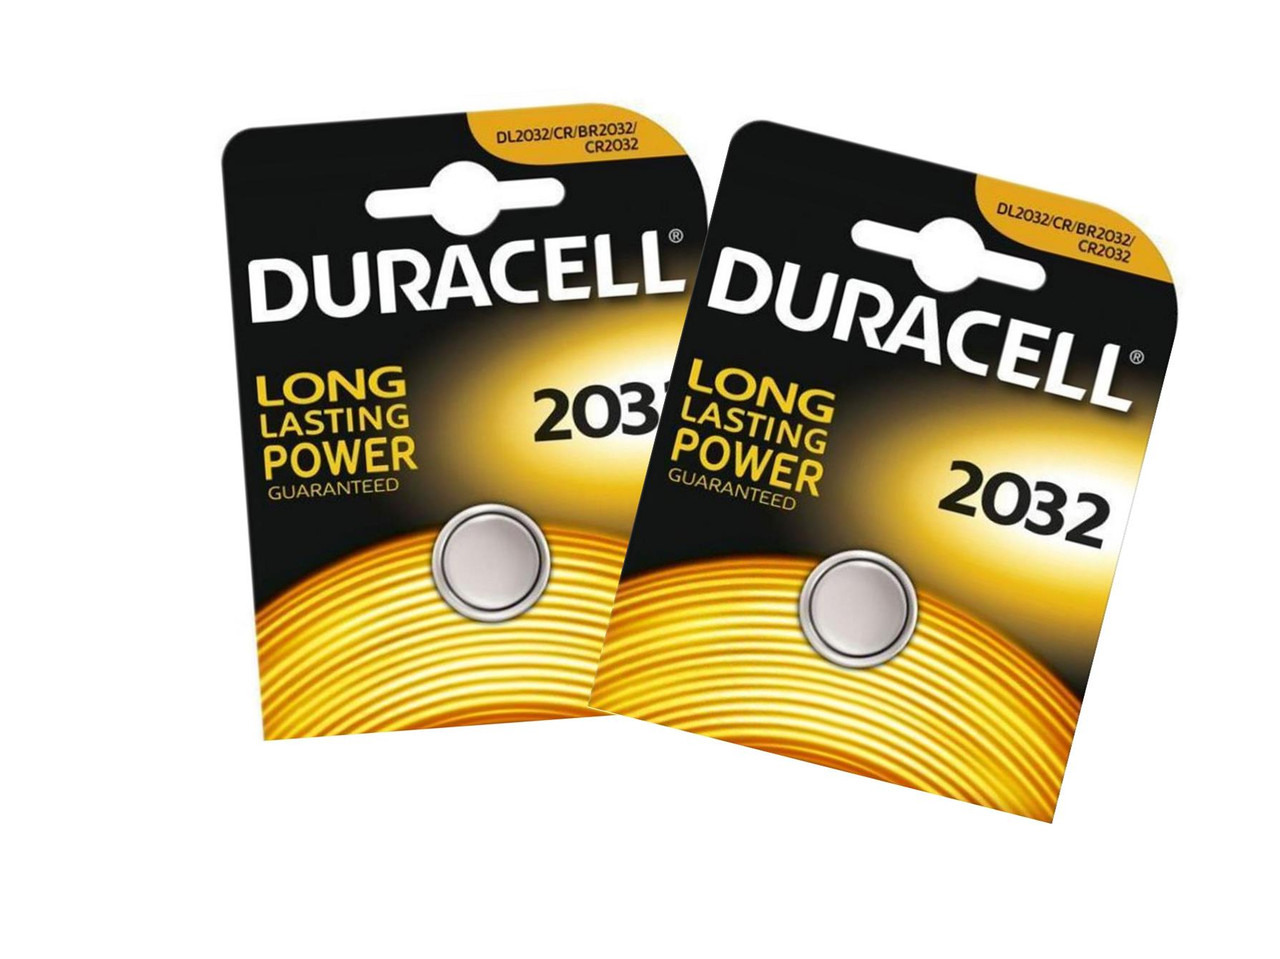 Duracell Specialty 2032 Lithium Coin Battery 3V, Pack of 2 (DL2032